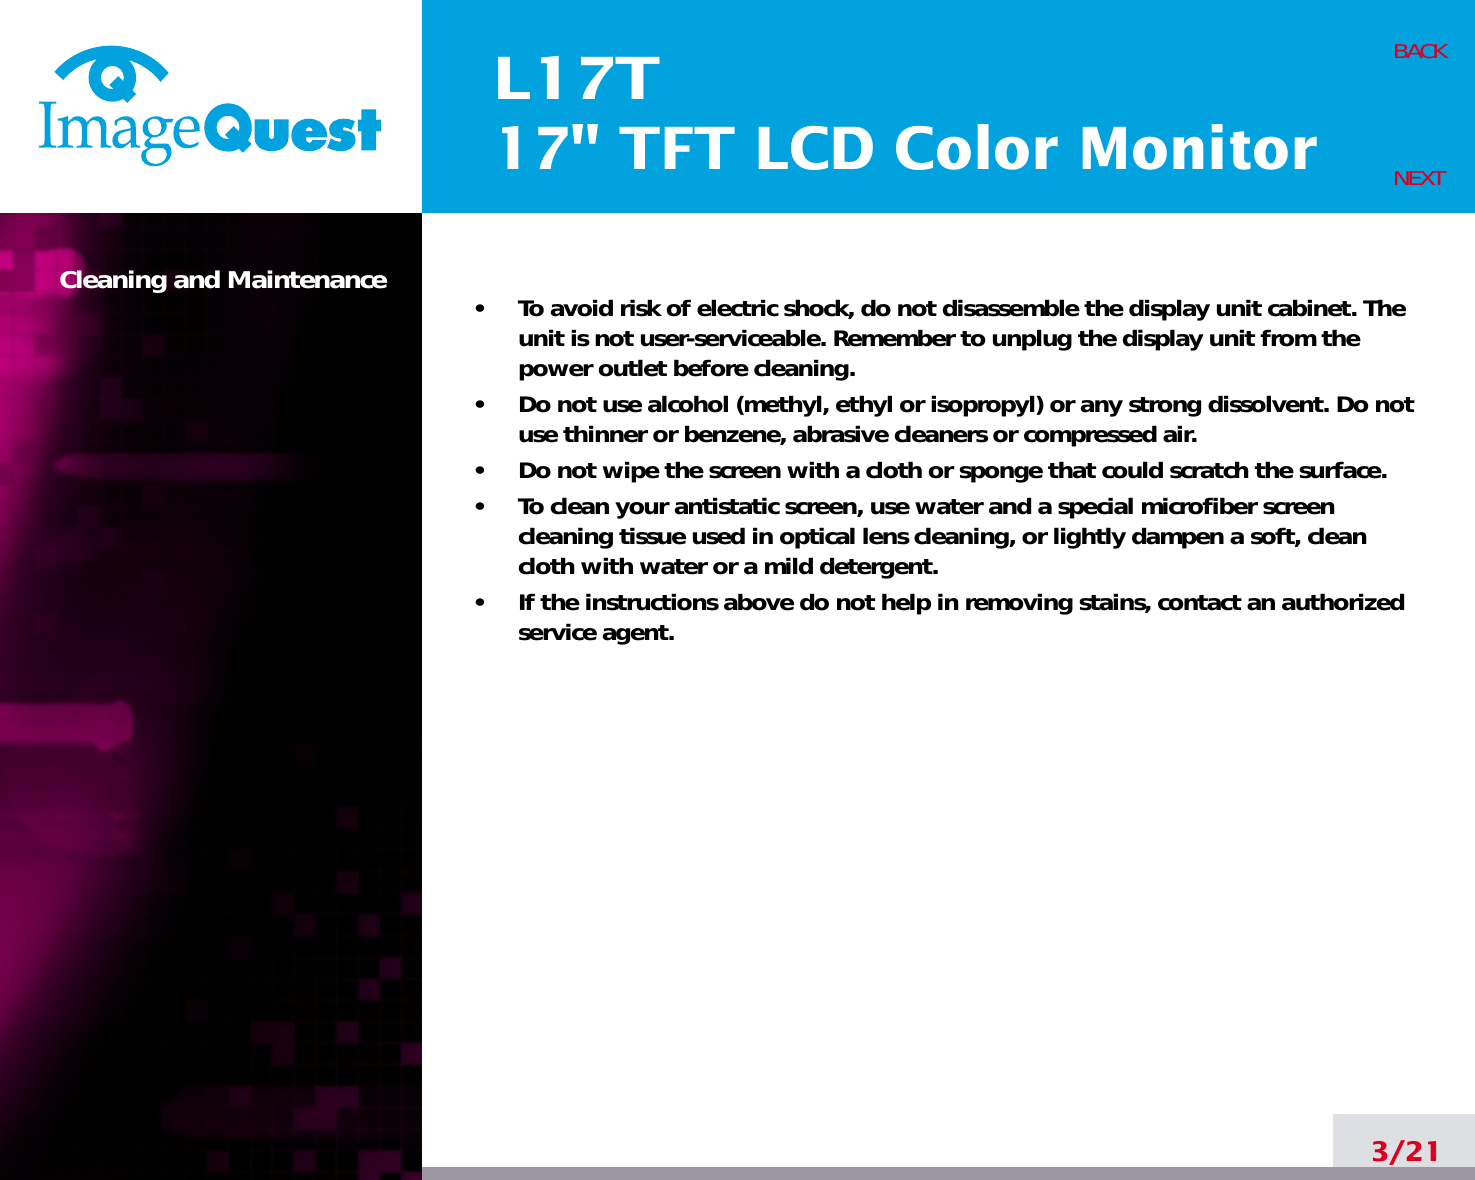 L17T17&quot; TFT LCD Color MonitorCleaning and Maintenance •     To avoid risk of electric shock, do not disassemble the display unit cabinet. Theunit is not user-serviceable. Remember to unplug the display unit from thepower outlet before cleaning.•     Do not use alcohol (methyl, ethyl or isopropyl) or any strong dissolvent. Do notuse thinner or benzene, abrasive cleaners or compressed air.•     Do not wipe the screen with a cloth or sponge that could scratch the surface.•     To clean your antistatic screen, use water and a special microfiber screencleaning tissue used in optical lens cleaning, or lightly dampen a soft, cleancloth with water or a mild detergent.•     If the instructions above do not help in removing stains, contact an authorizedservice agent. 3/21BACKNEXT